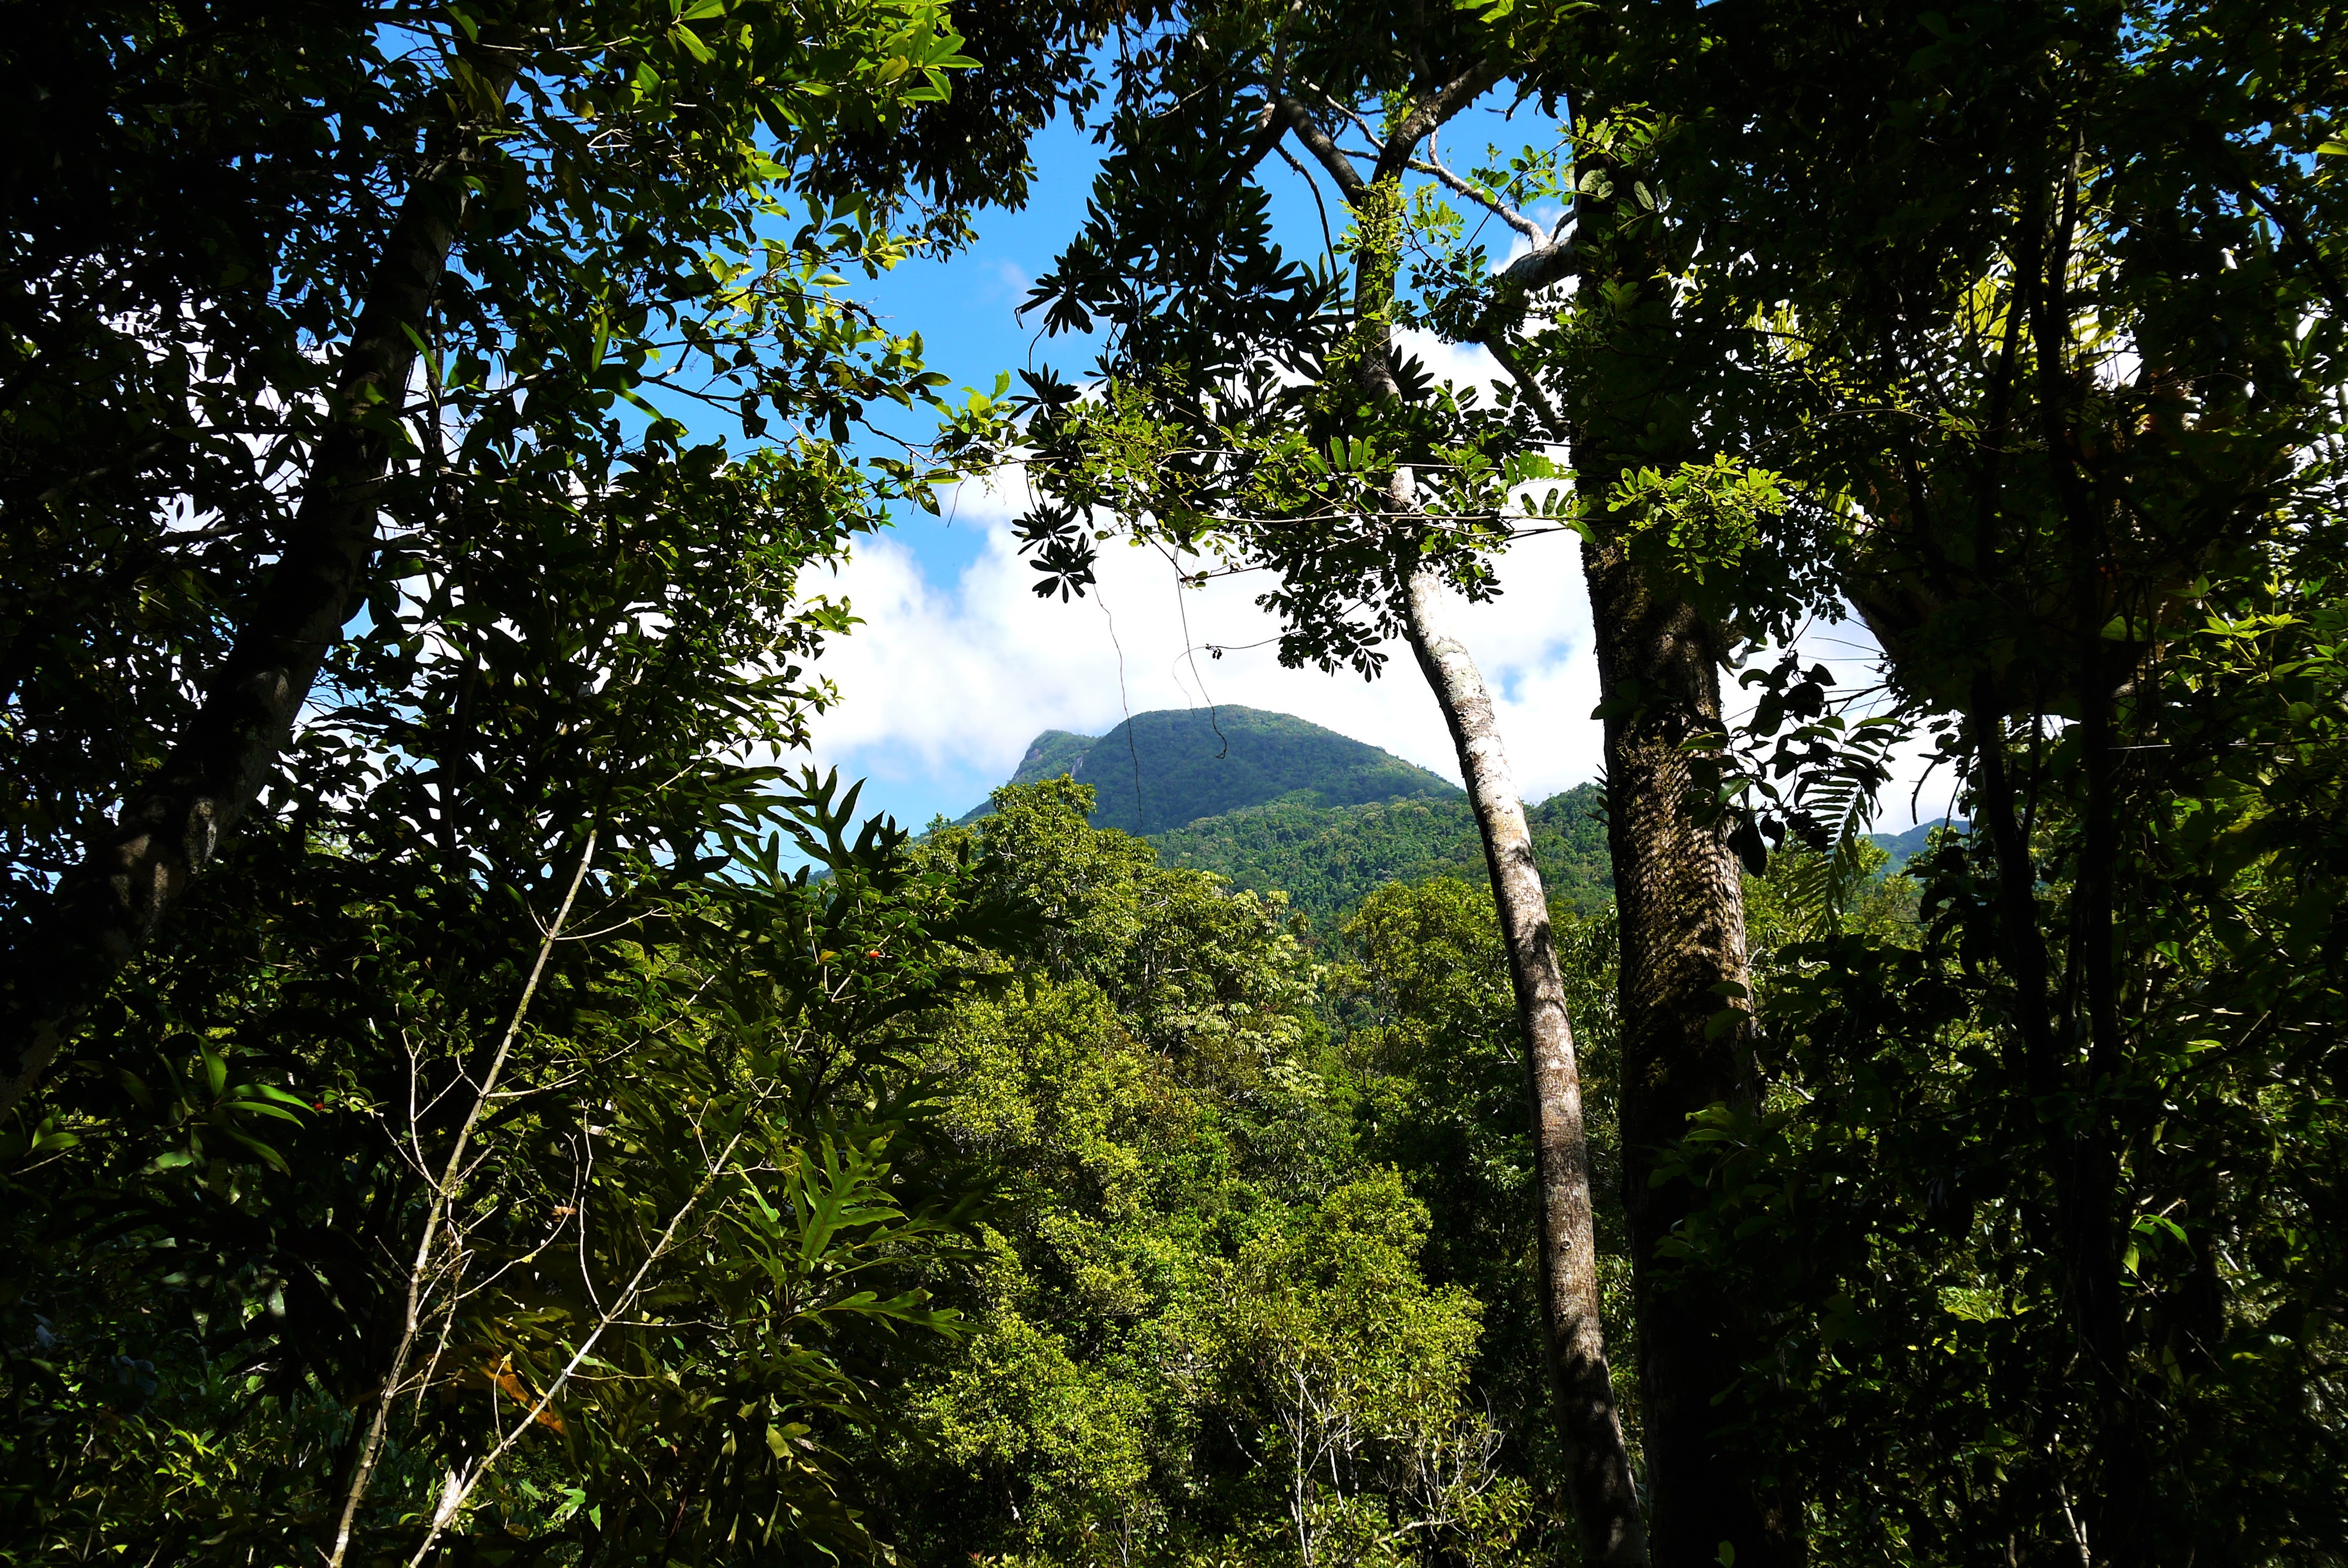 The ancient Daintree Rainforest, one of many Queensland highlights